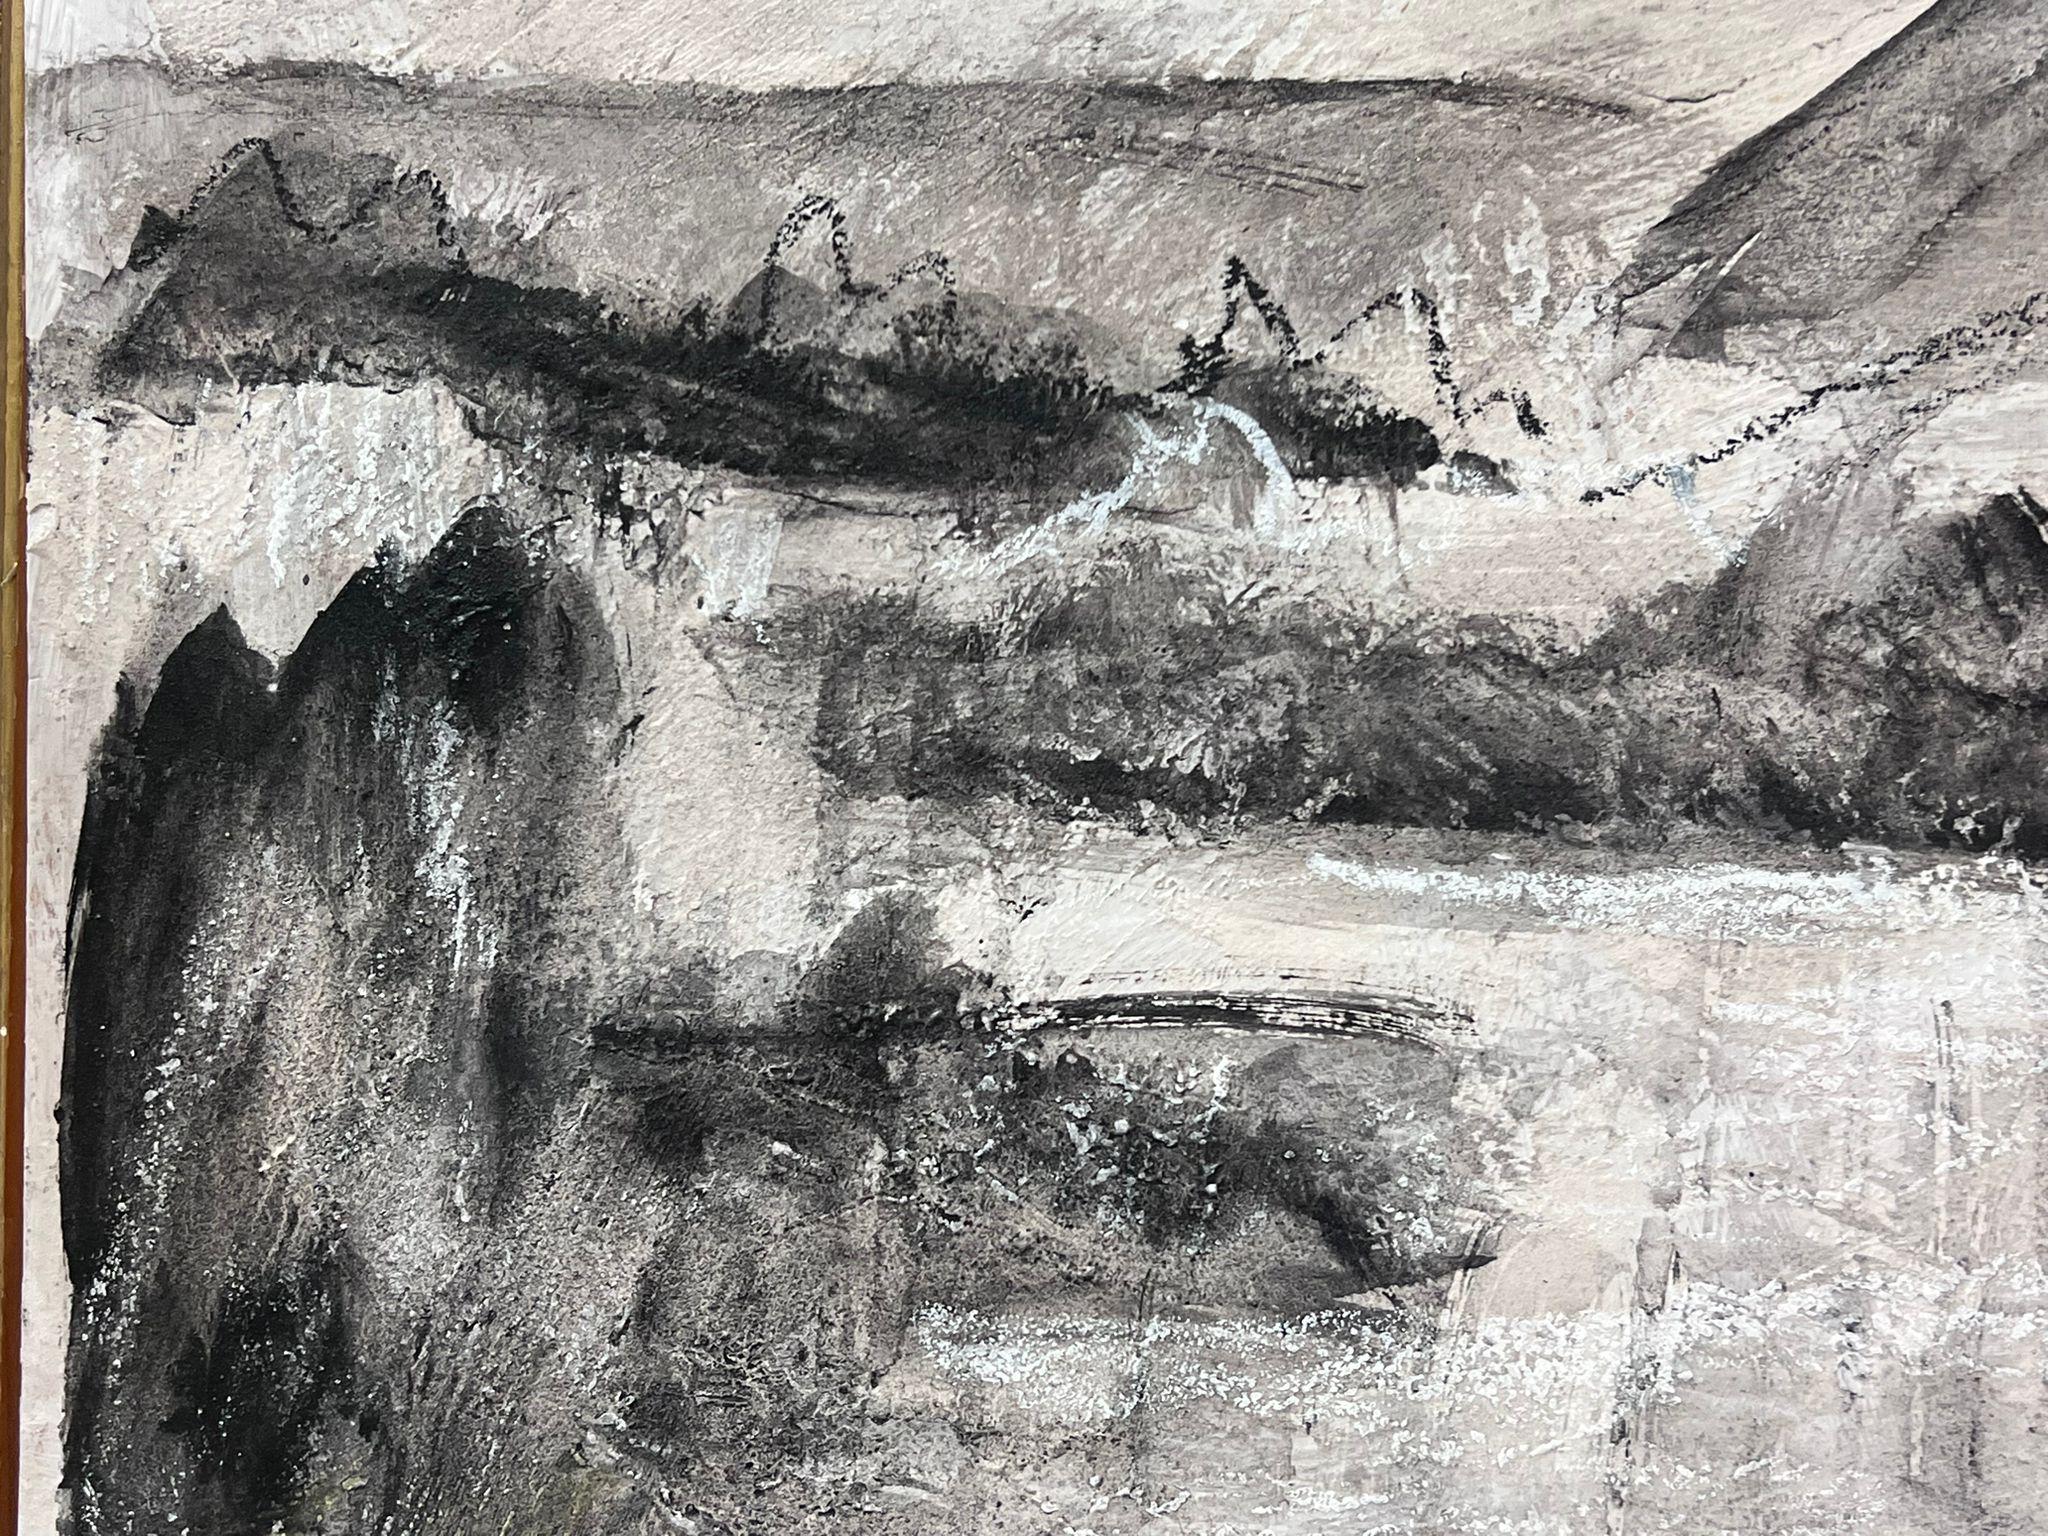 Black and White Landscape
by Helen Greenfield (British 20th century) 
signed initials gouache painting on thin board, unframed
board: 15.5 x 32 inches
condition: overall very good
provenance: all the paintings we have by this artist have come from